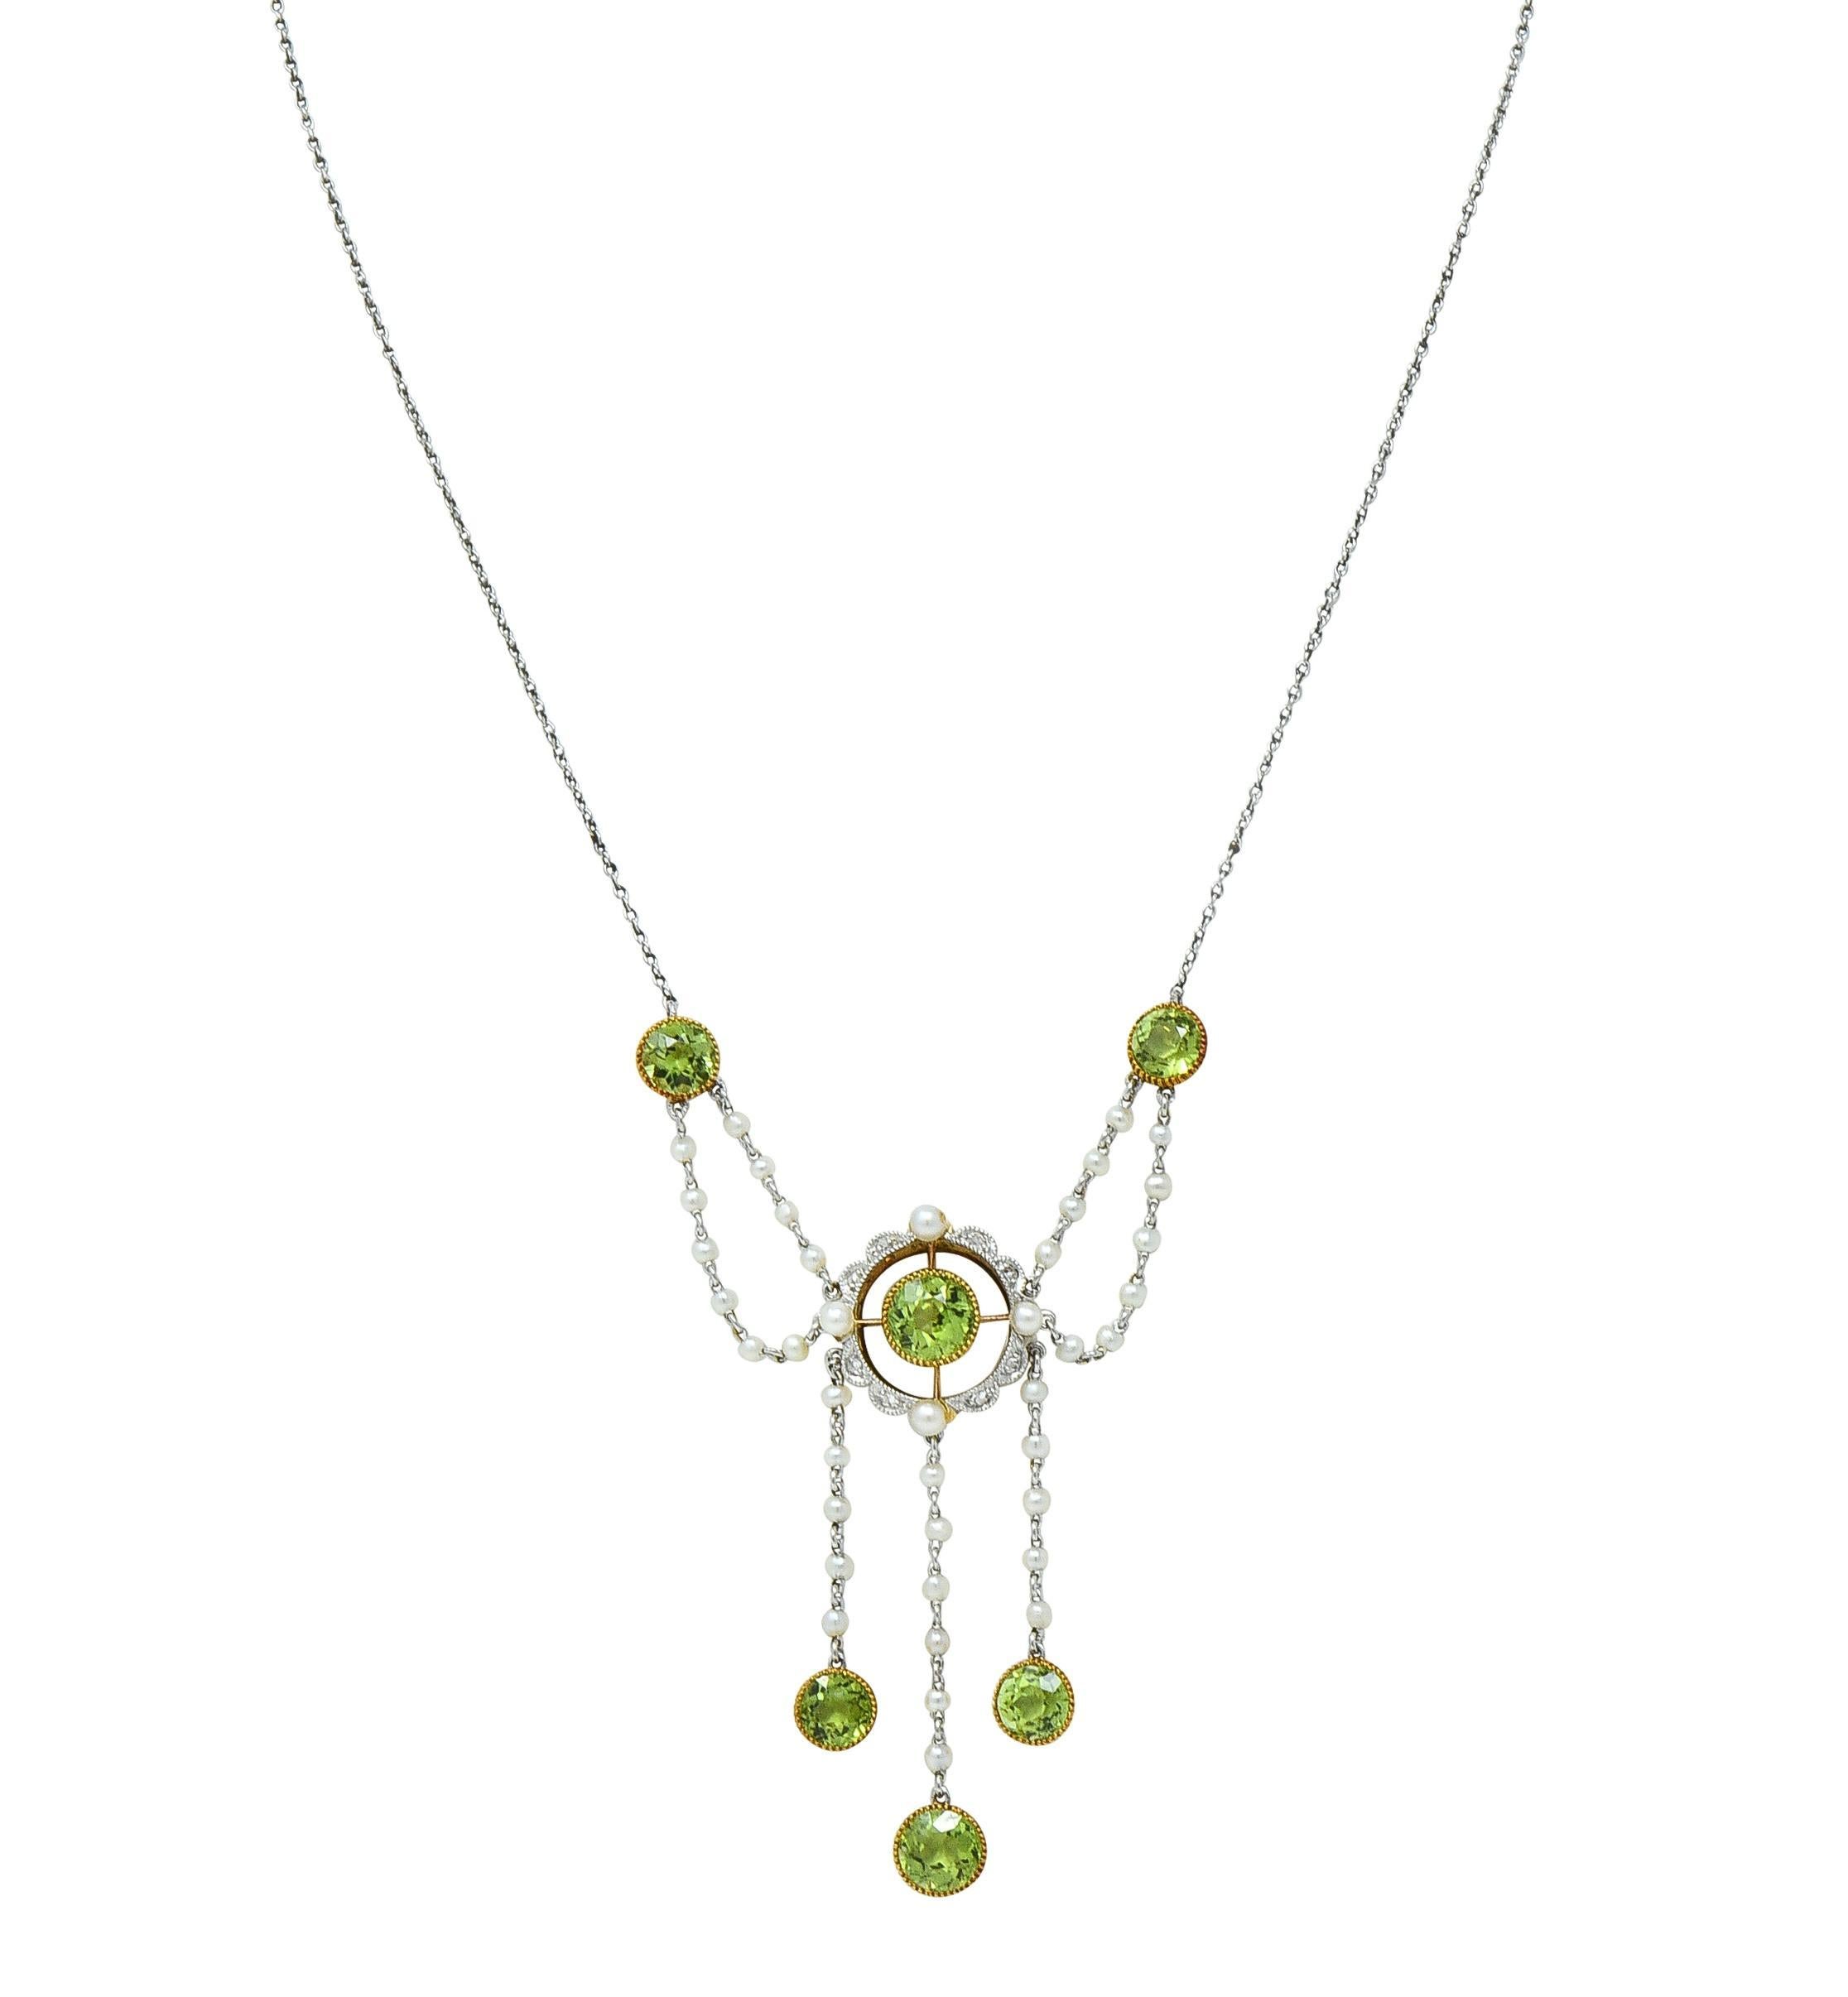 Edwardian Diamond Peridot Pearl Platinum 14 Karat Gold Swagged Fringe Necklace In Excellent Condition For Sale In Philadelphia, PA